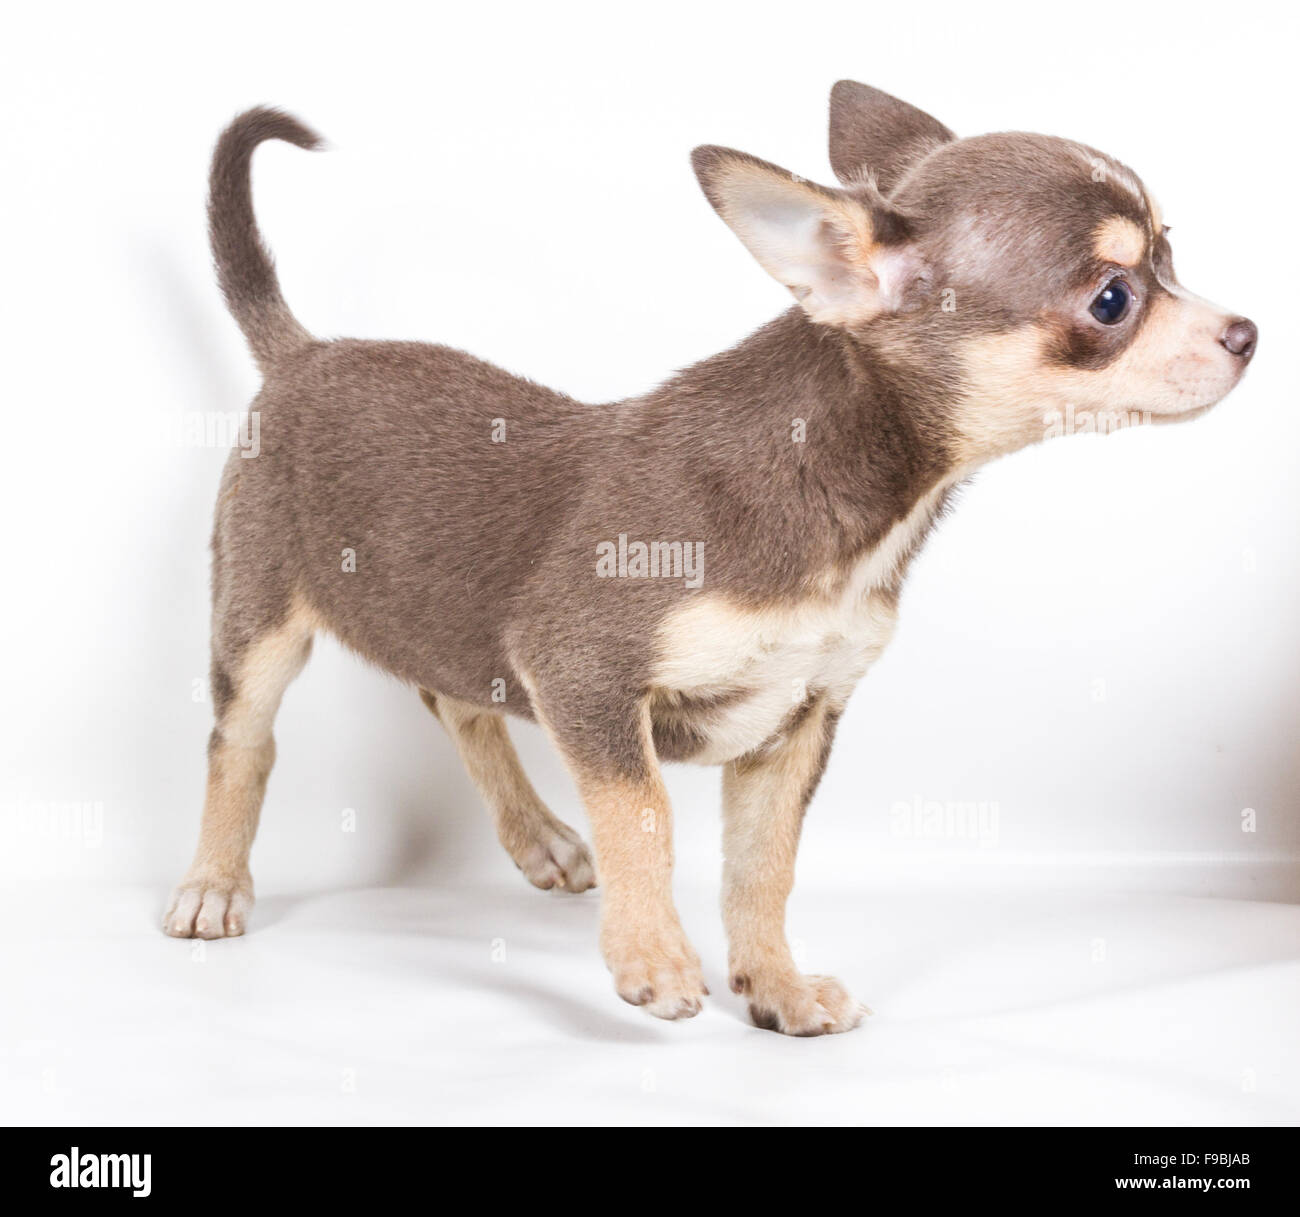 Chocolate and white Chihuahua puppy, 8 weeks old, standing